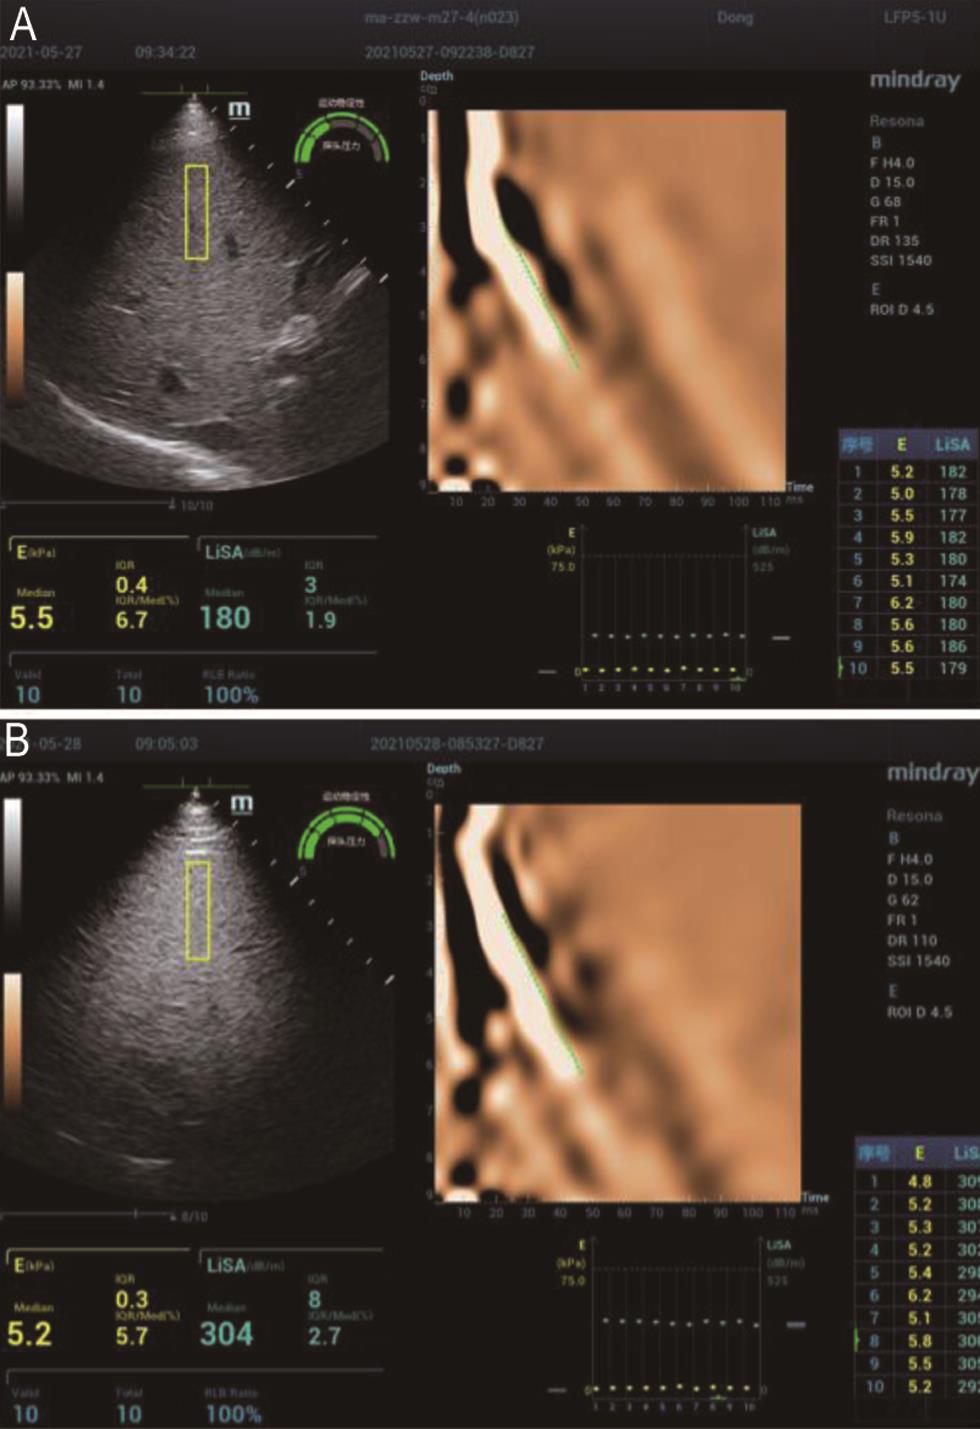 Representative liver ultrasound attenuation (LiSA) measurements of a patient (A) without fatty liver and a patient (B) with fatty liver.